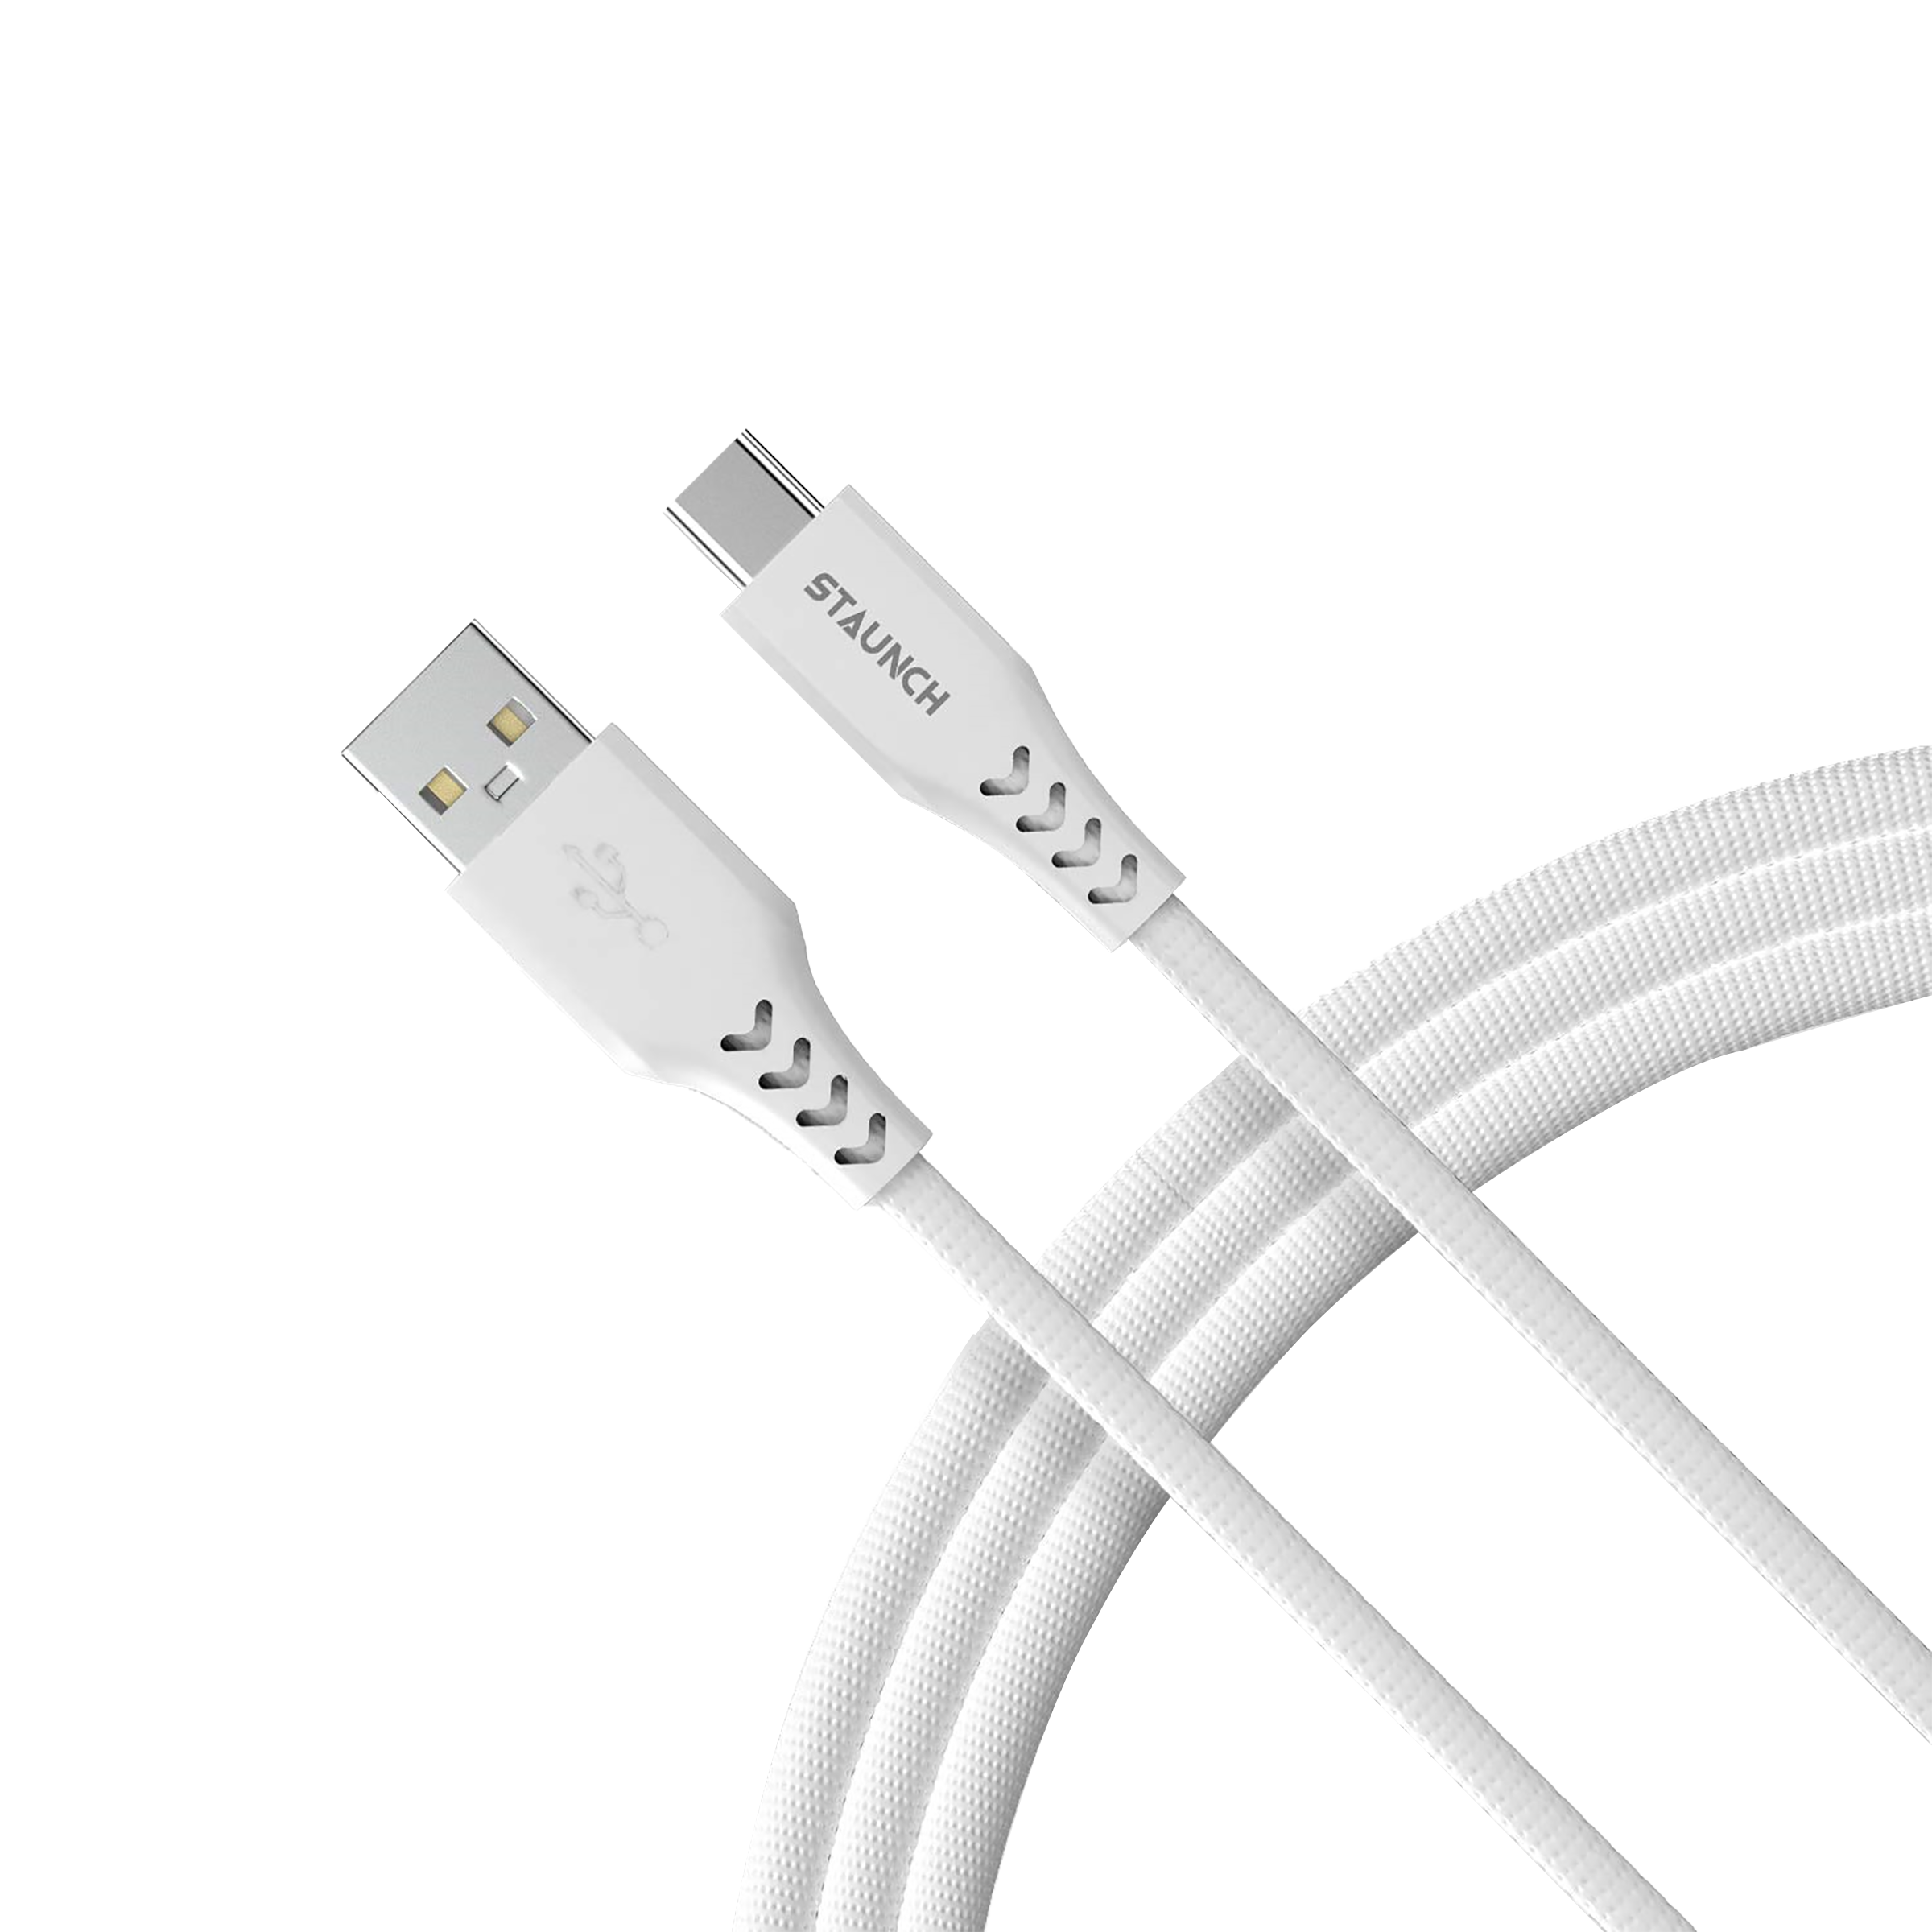 Staunch Spark S3 PVC 1 Meter USB 2.0 (Type-A) to USB 2.0 (Type-C) Power/Charging USB Cable (480 Mbps Speed, White)